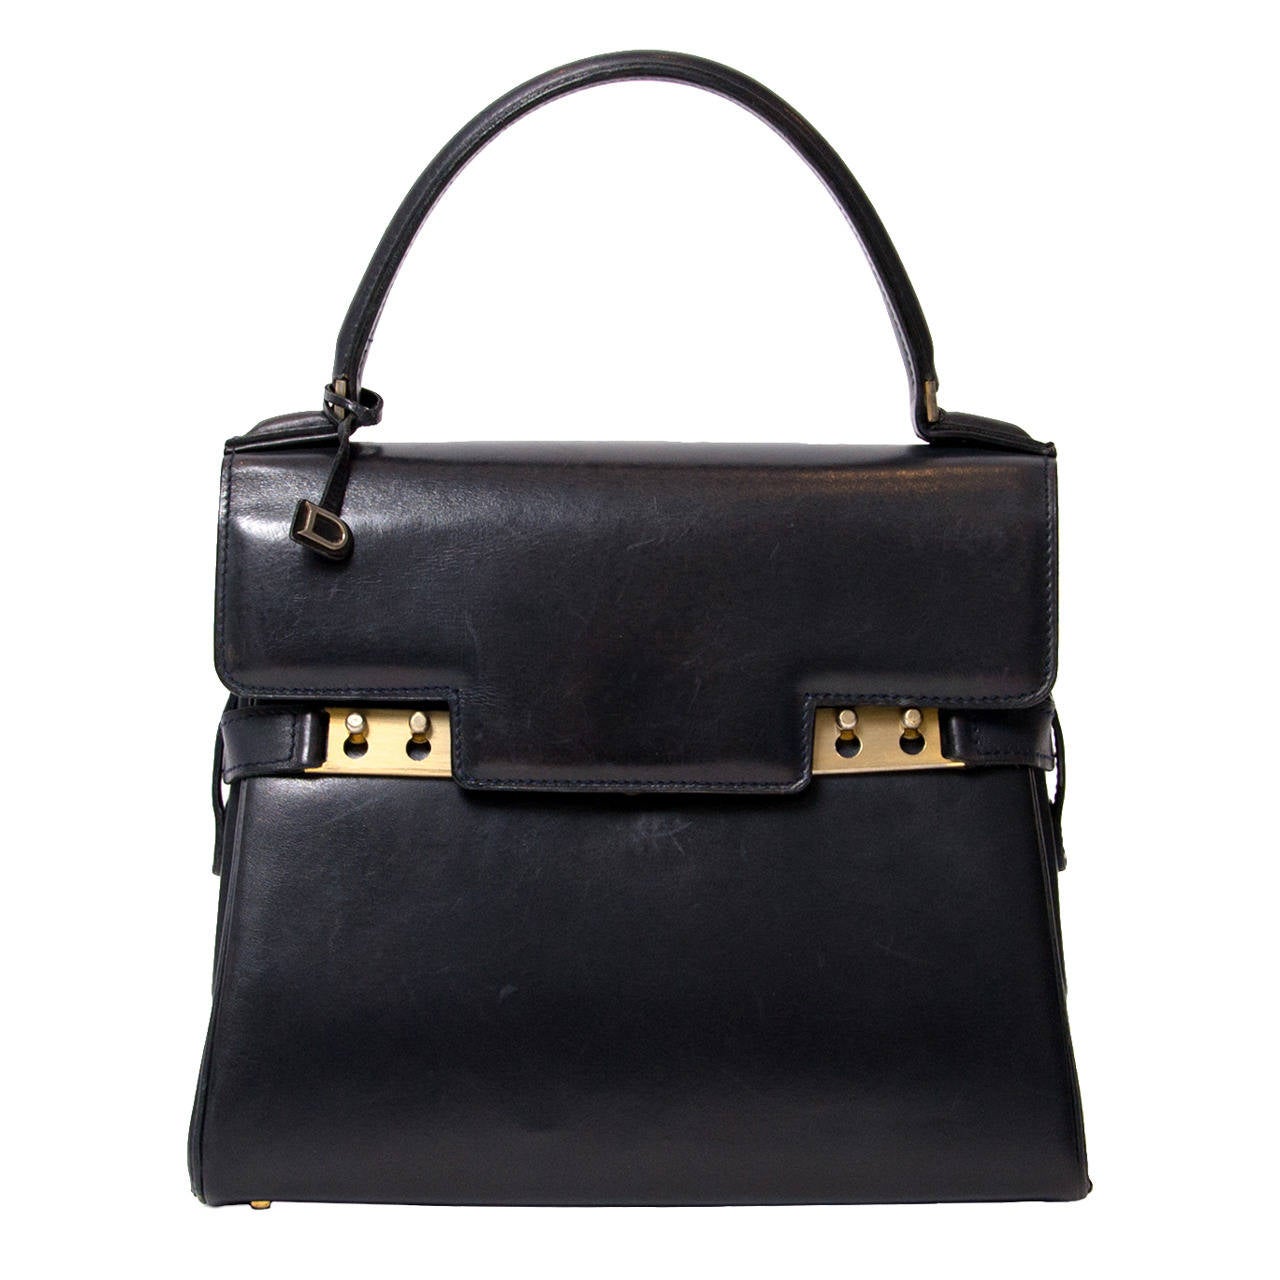 Delvaux Pm - 3 For Sale on 1stDibs  delvaux brillant pm, delvaux tempete pm,  delvaux brillant pm size